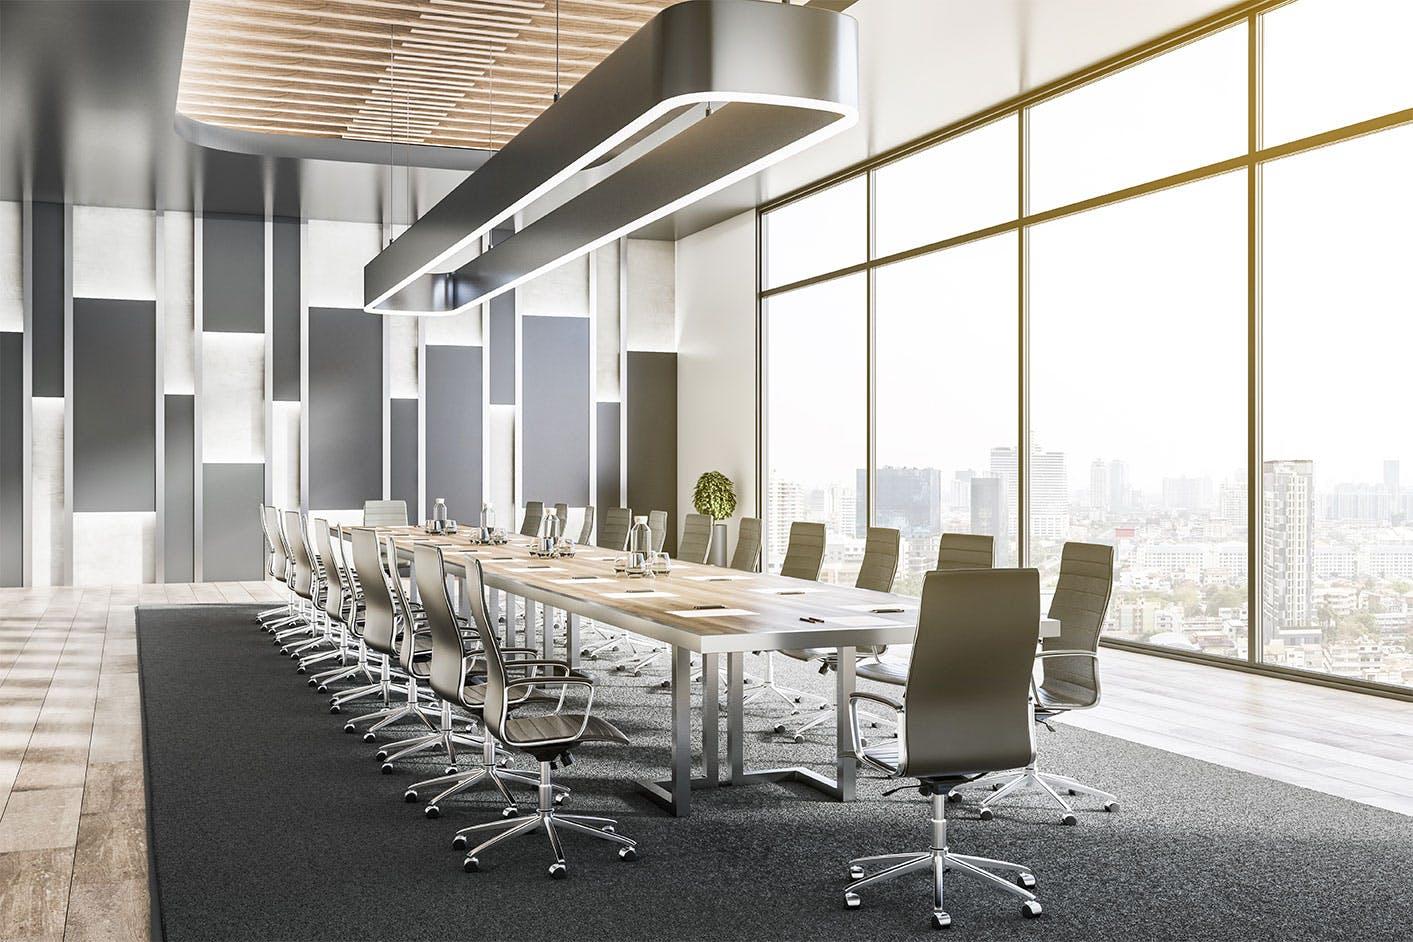 Corporate meeting room with skyscraper background